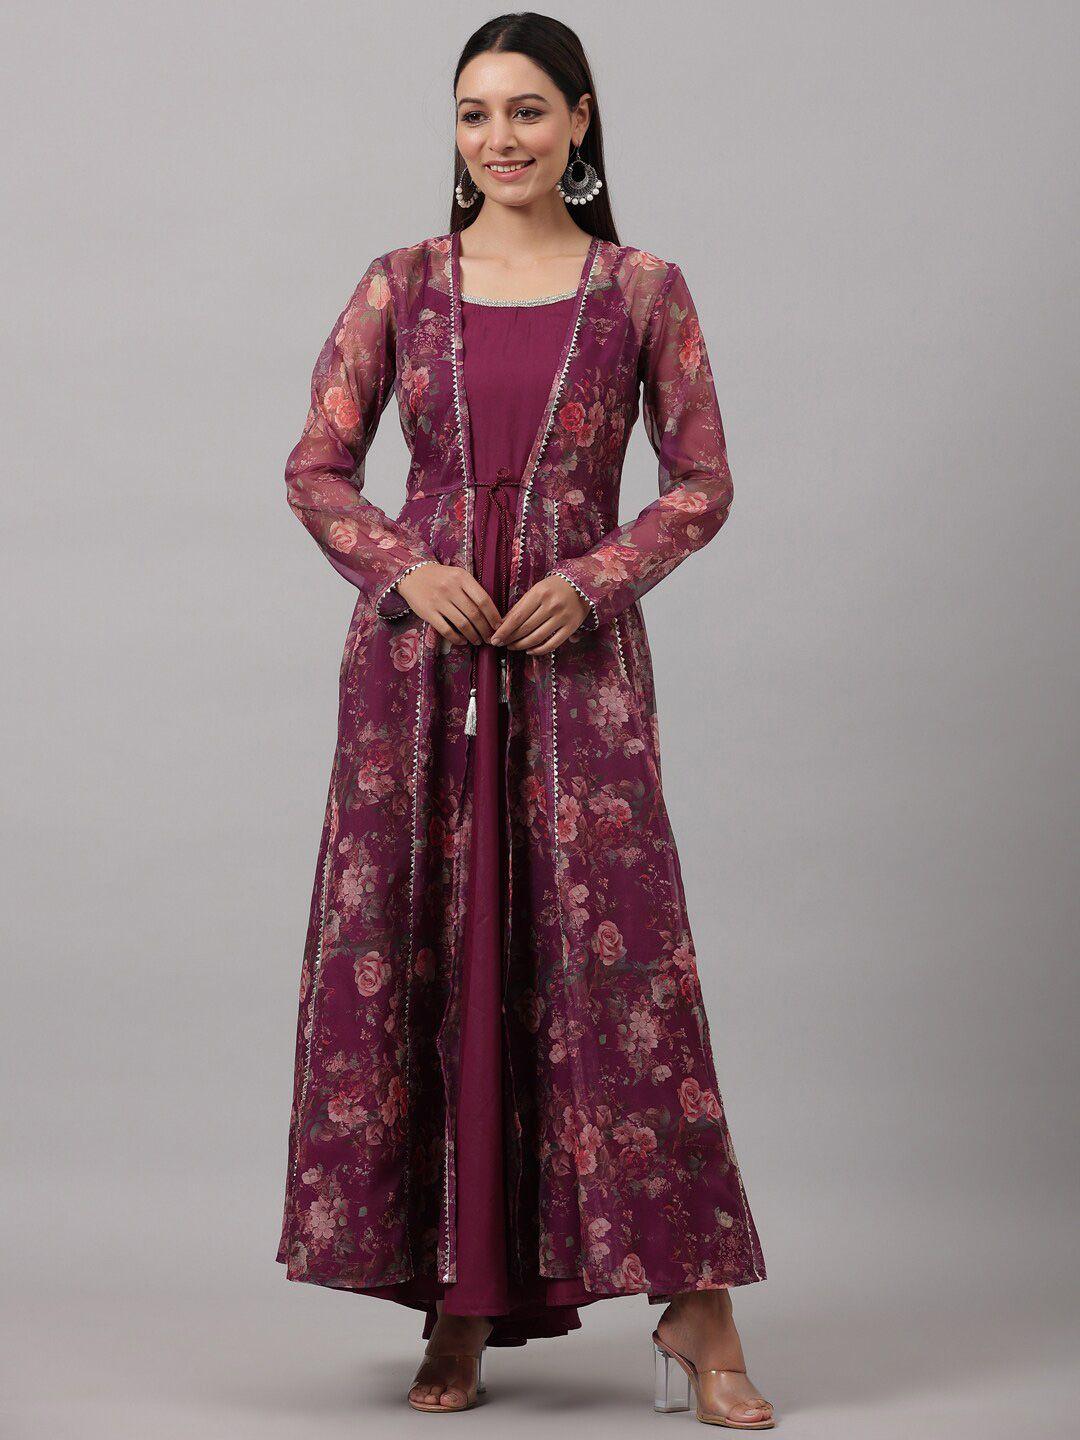 do-dhaage-maxi-ethnic-dress-with-floral-printed-organza-jacket